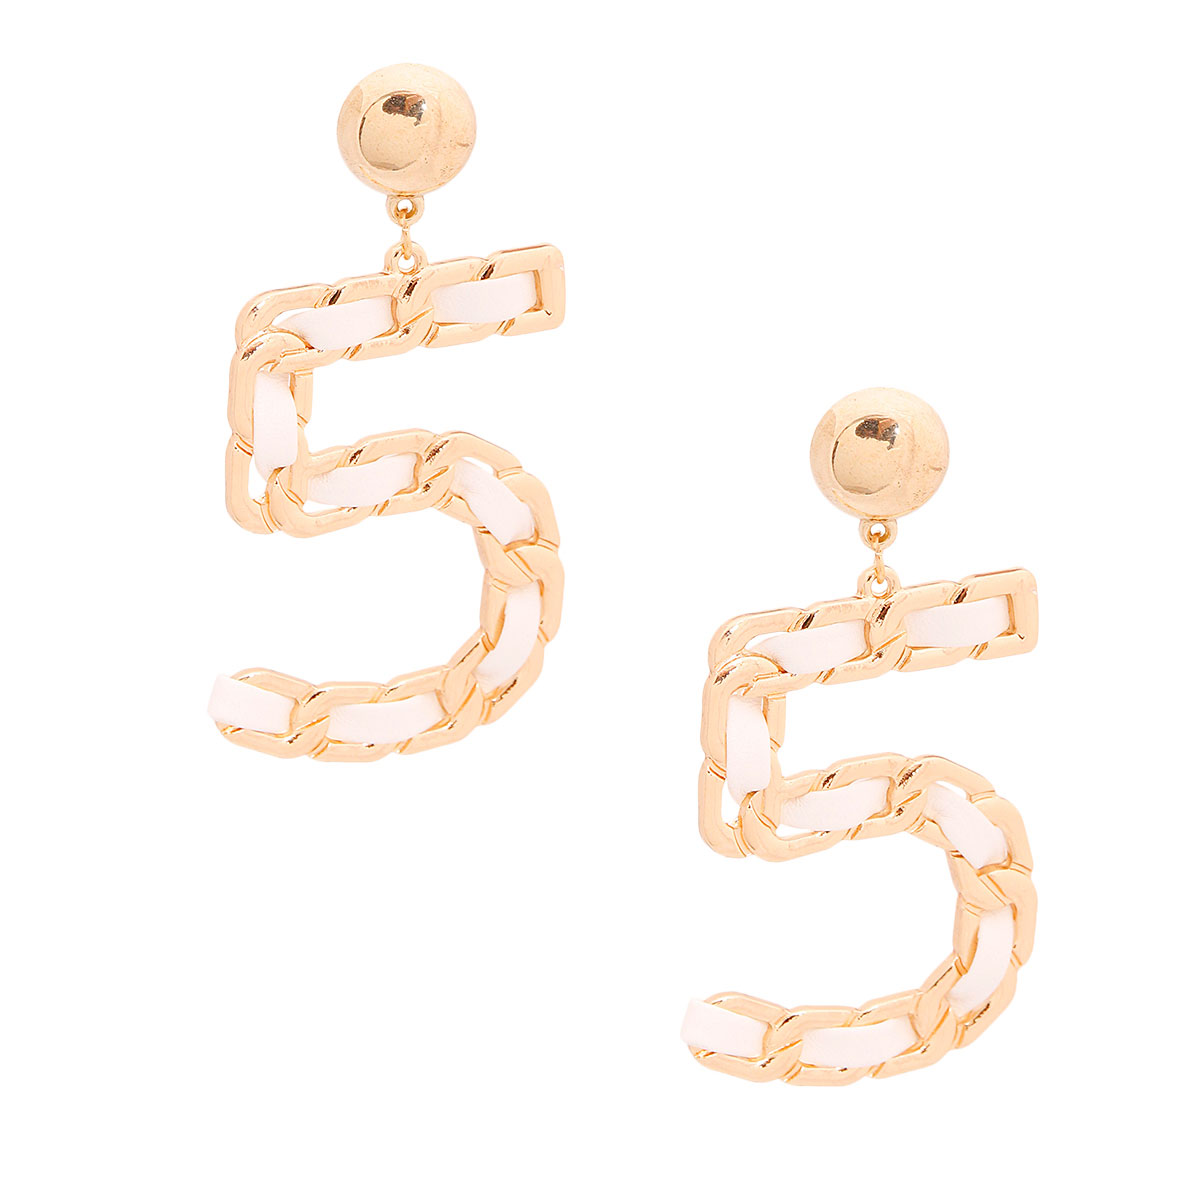 White and Gold No 5 Earrings